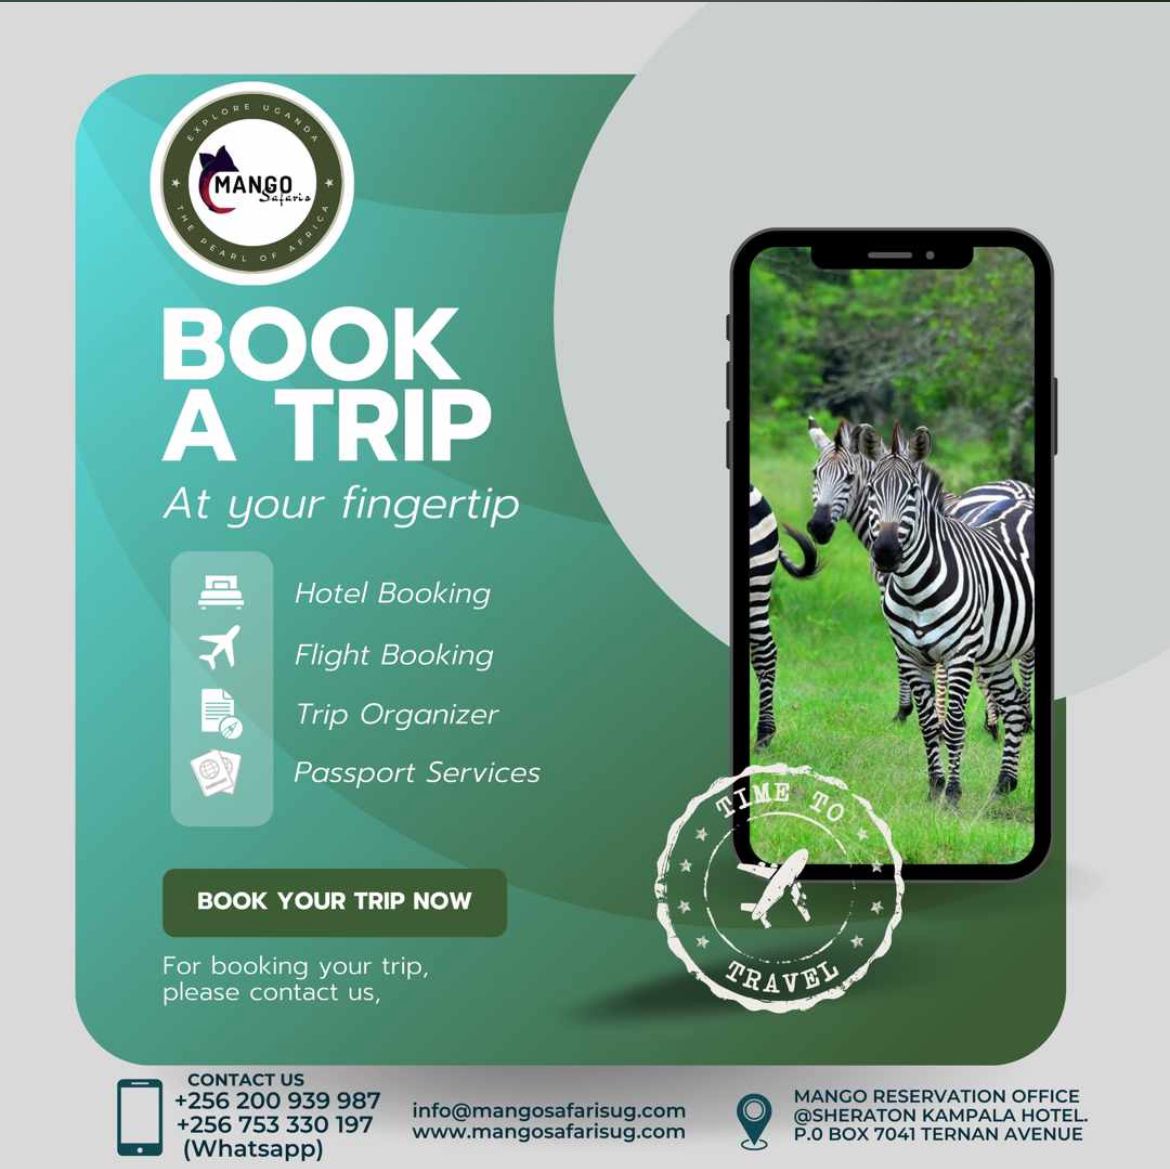 Book your dream trip with just a tap! Whether you crave adrenaline-pumping activities or serene nature walks, we've got the perfect itinerary for you.

Visit: mangosafarisug.com to get started.
Travel with #MangoSafaris Uganda